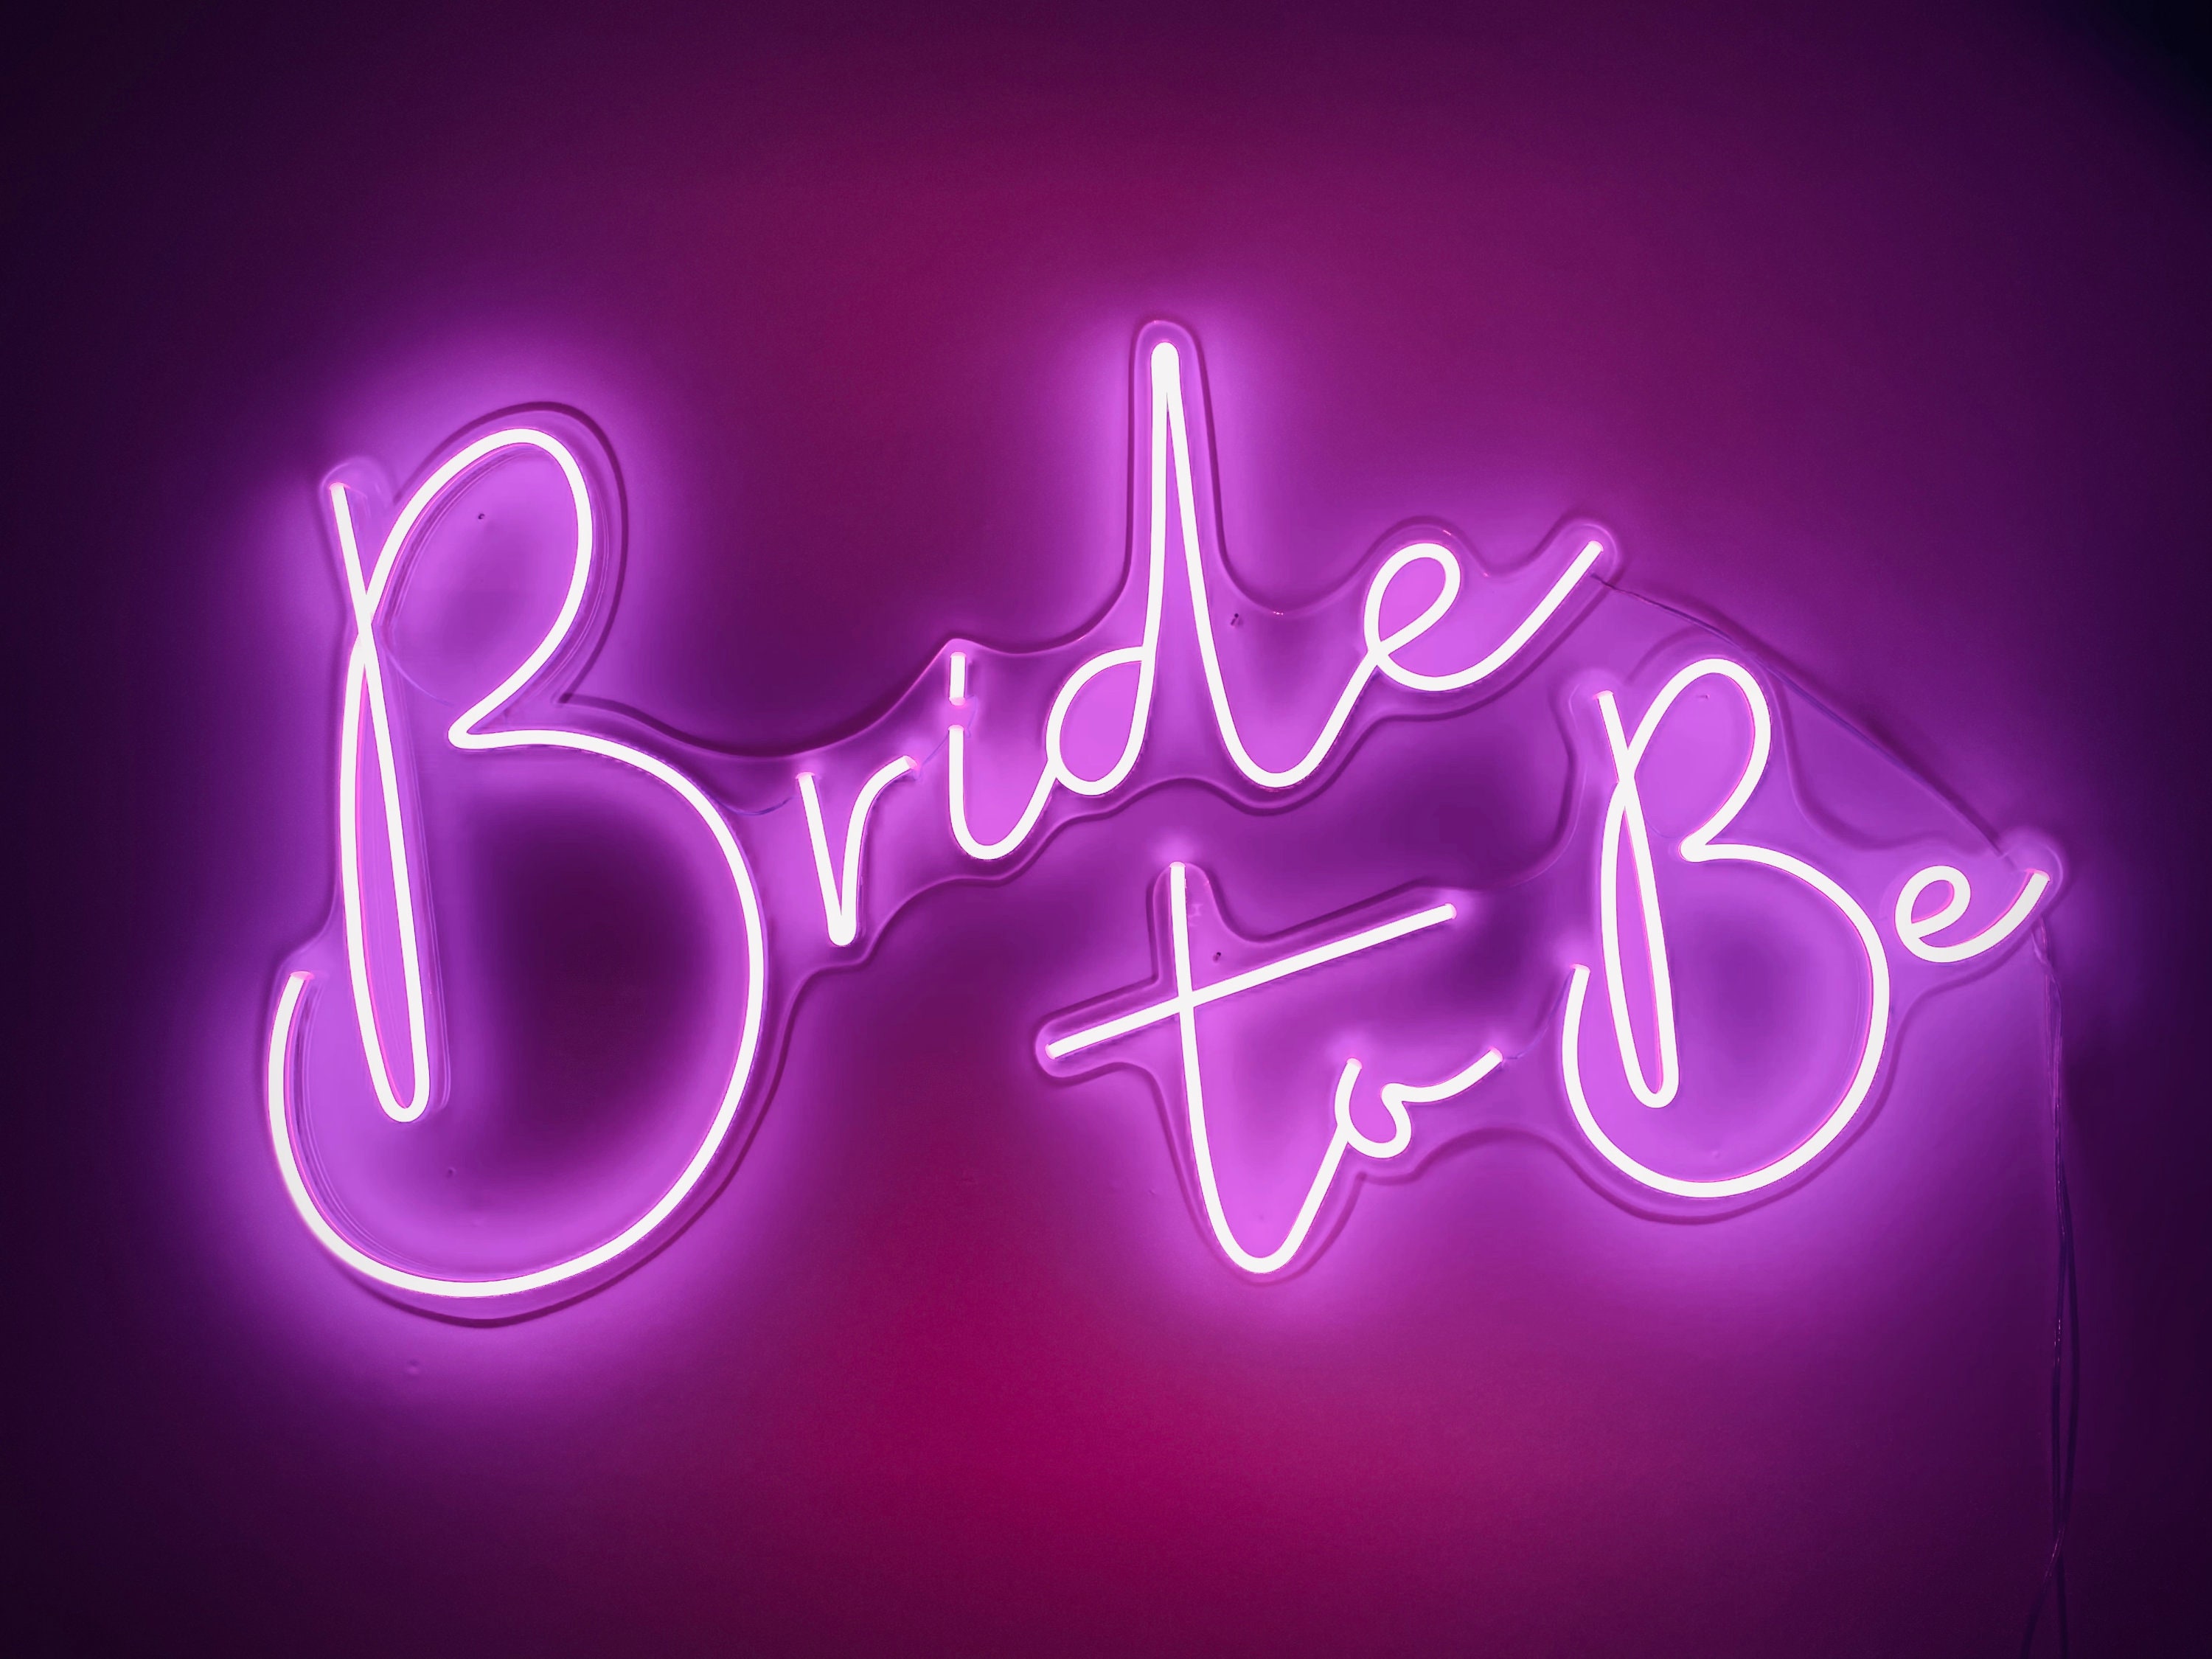 Led Wedding Neon Sign Bride To Be Engagement Custom Neon Etsy Free